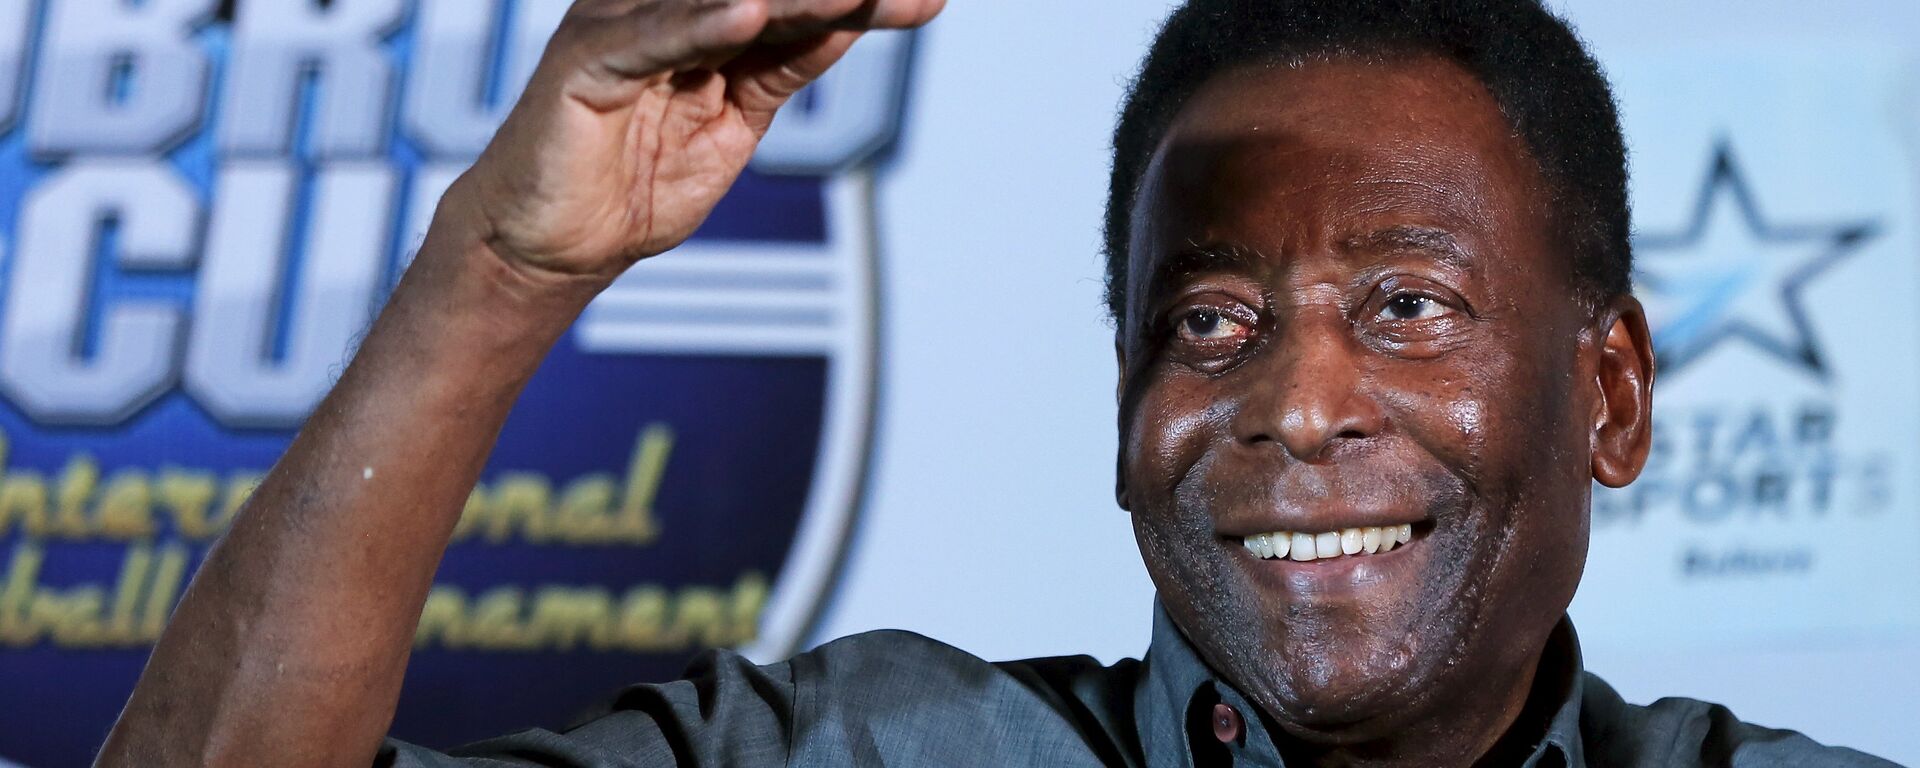 Legendary Brazilian soccer player Pele gestures during a news conference in Gurgaon on the outskirts of New Delhi, India, October 15, 2015 - اسپوتنیک افغانستان  , 1920, 22.04.2022